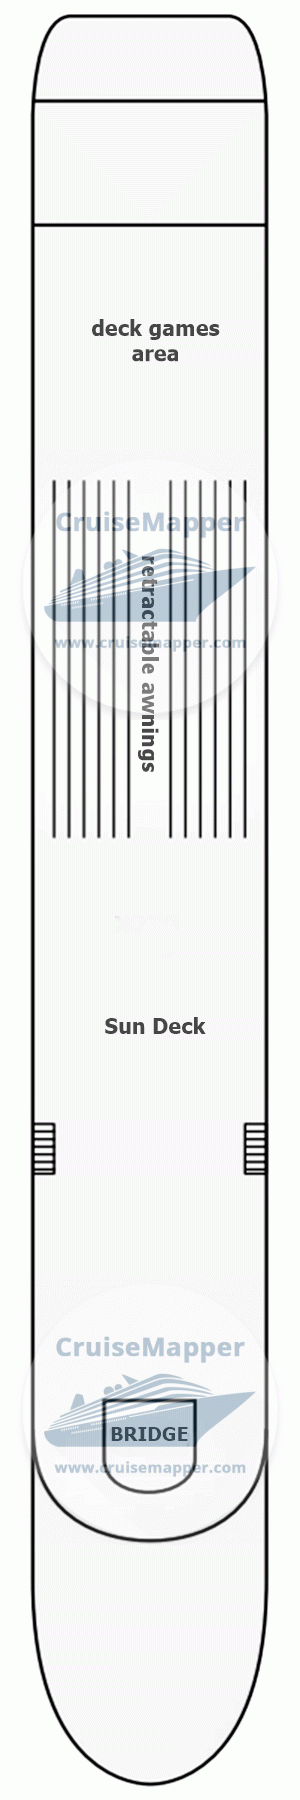 MS Excellence Pearl Deck 03 - Sundeck